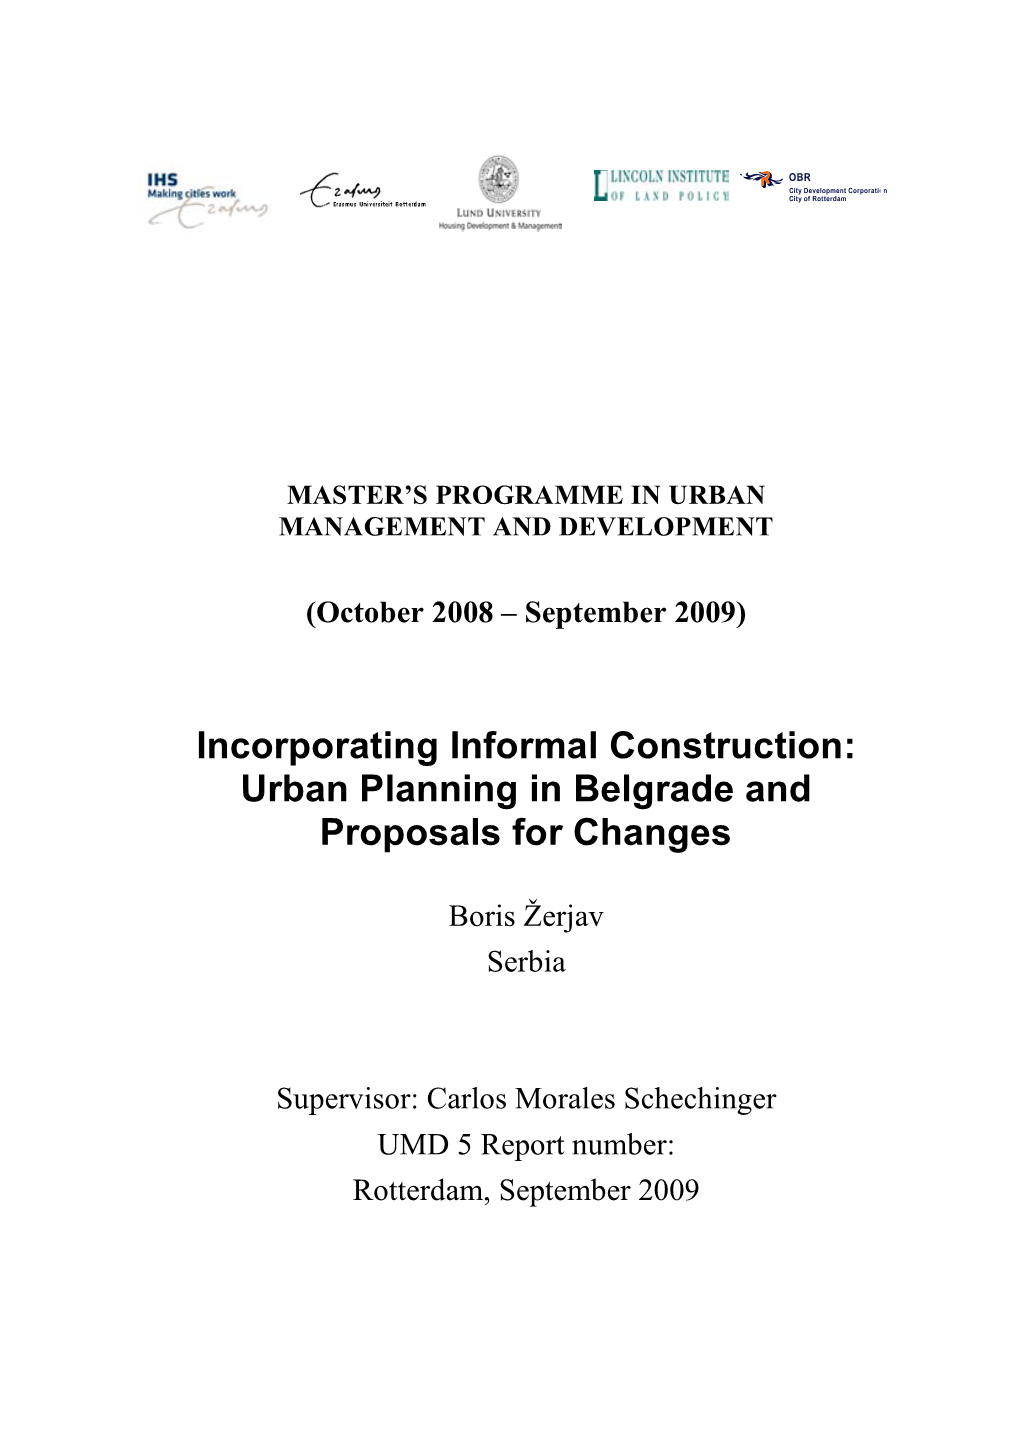 Incorporating Informal Construction: Urban Planning in Belgrade and Proposals for Changes